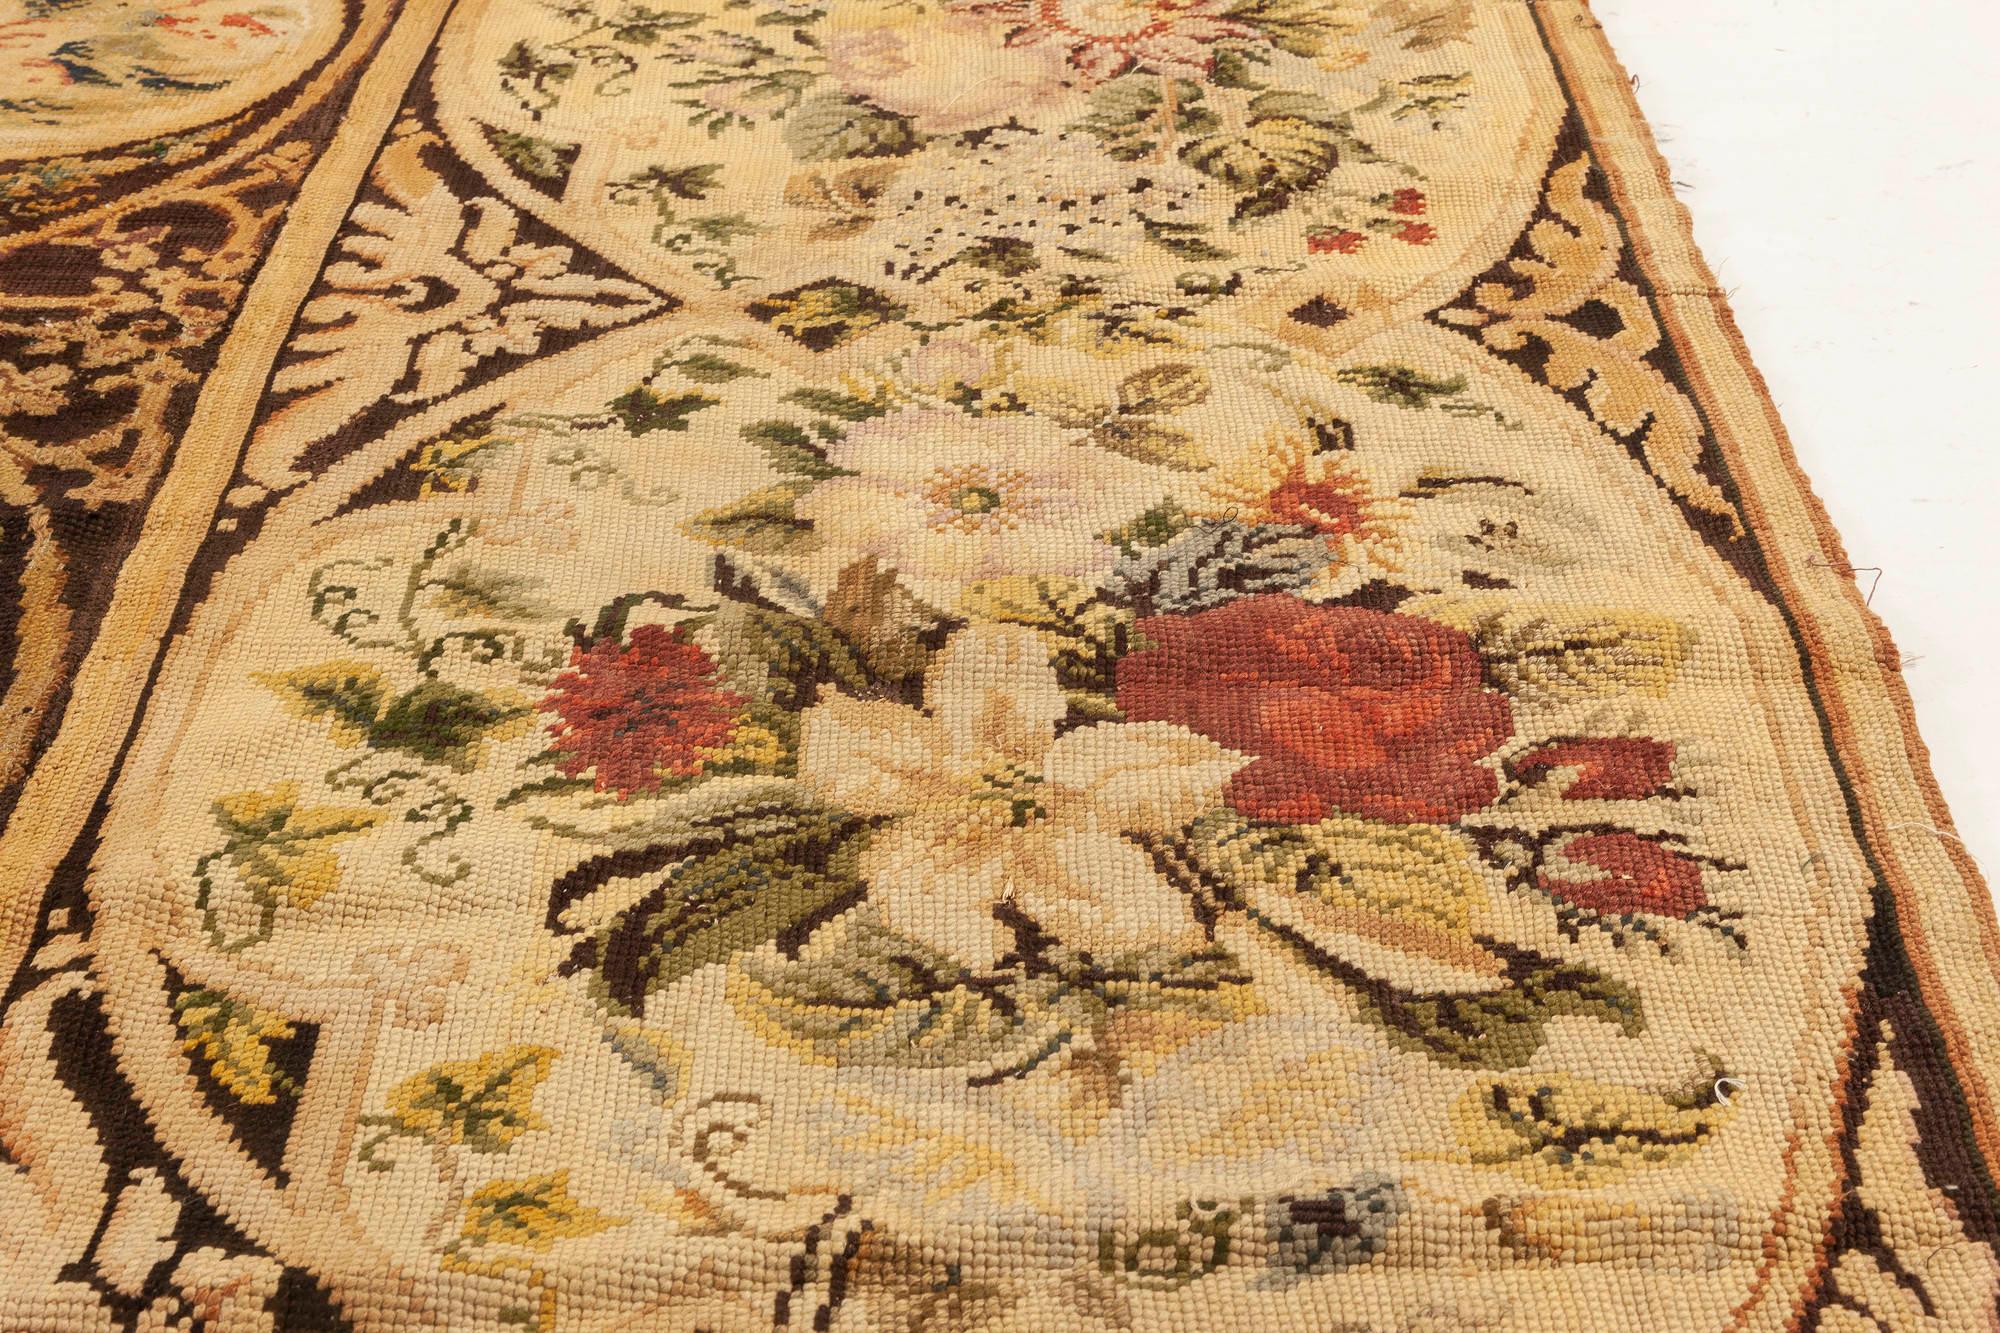 Wool 19th Century English Needlework Sized Adjusted For Sale